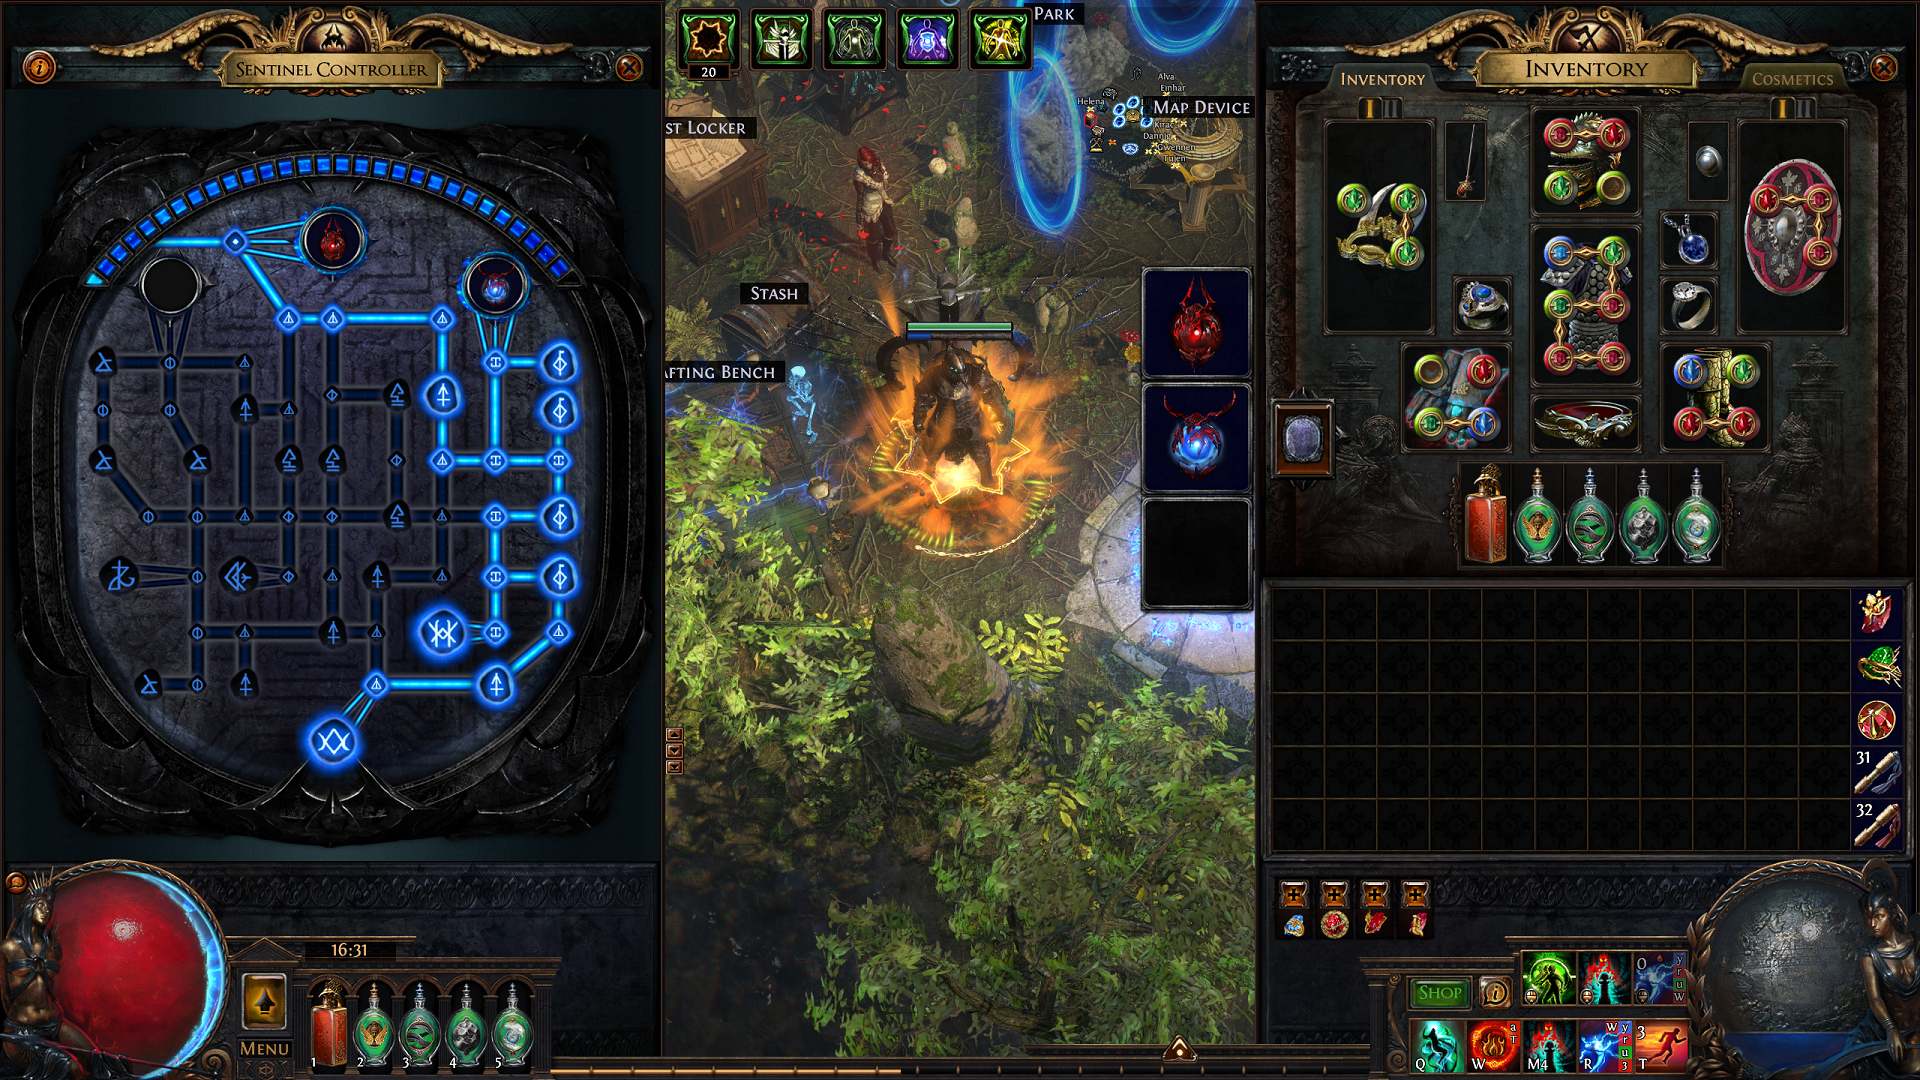 Path Of Exile's Sentinel Controller, which players can use to customize their Sentinels and potential loot drops